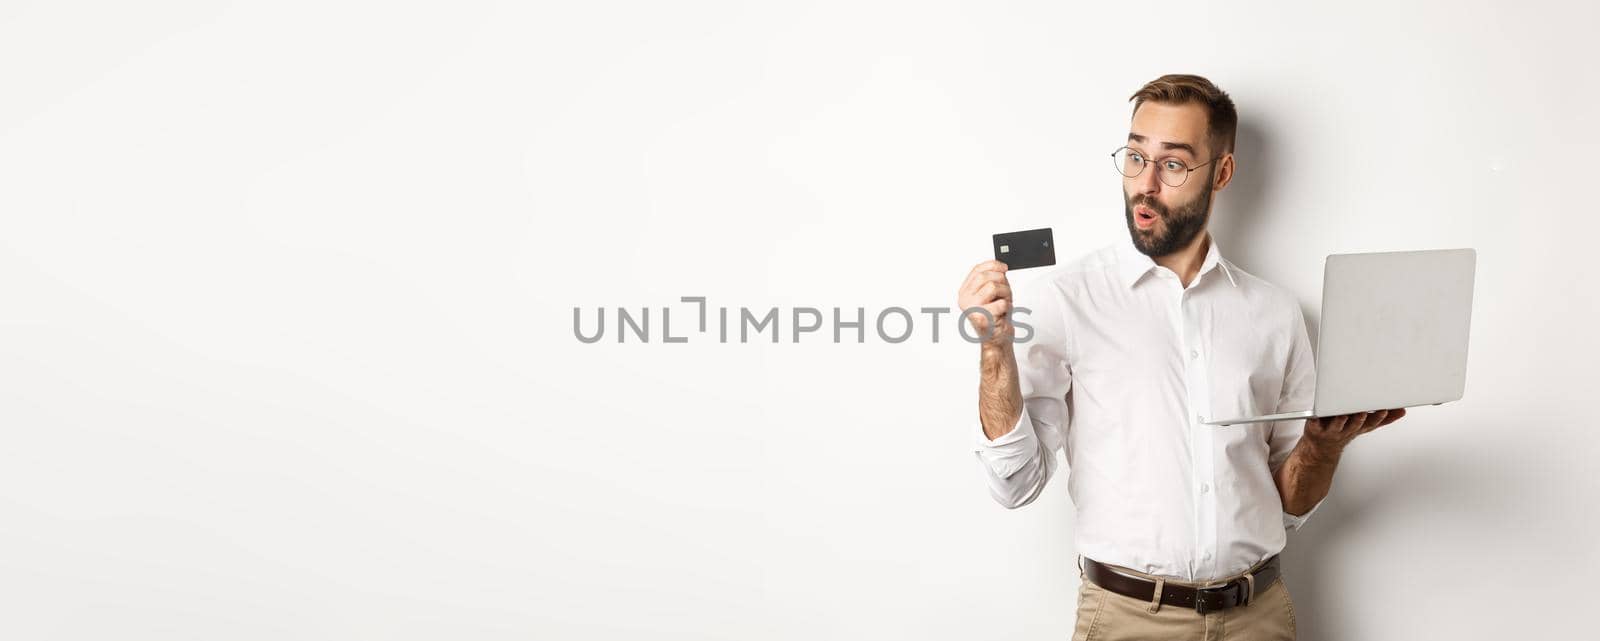 Online shopping. Amazed businessman holding laptop, looking impressed at credit card, standing over white background.